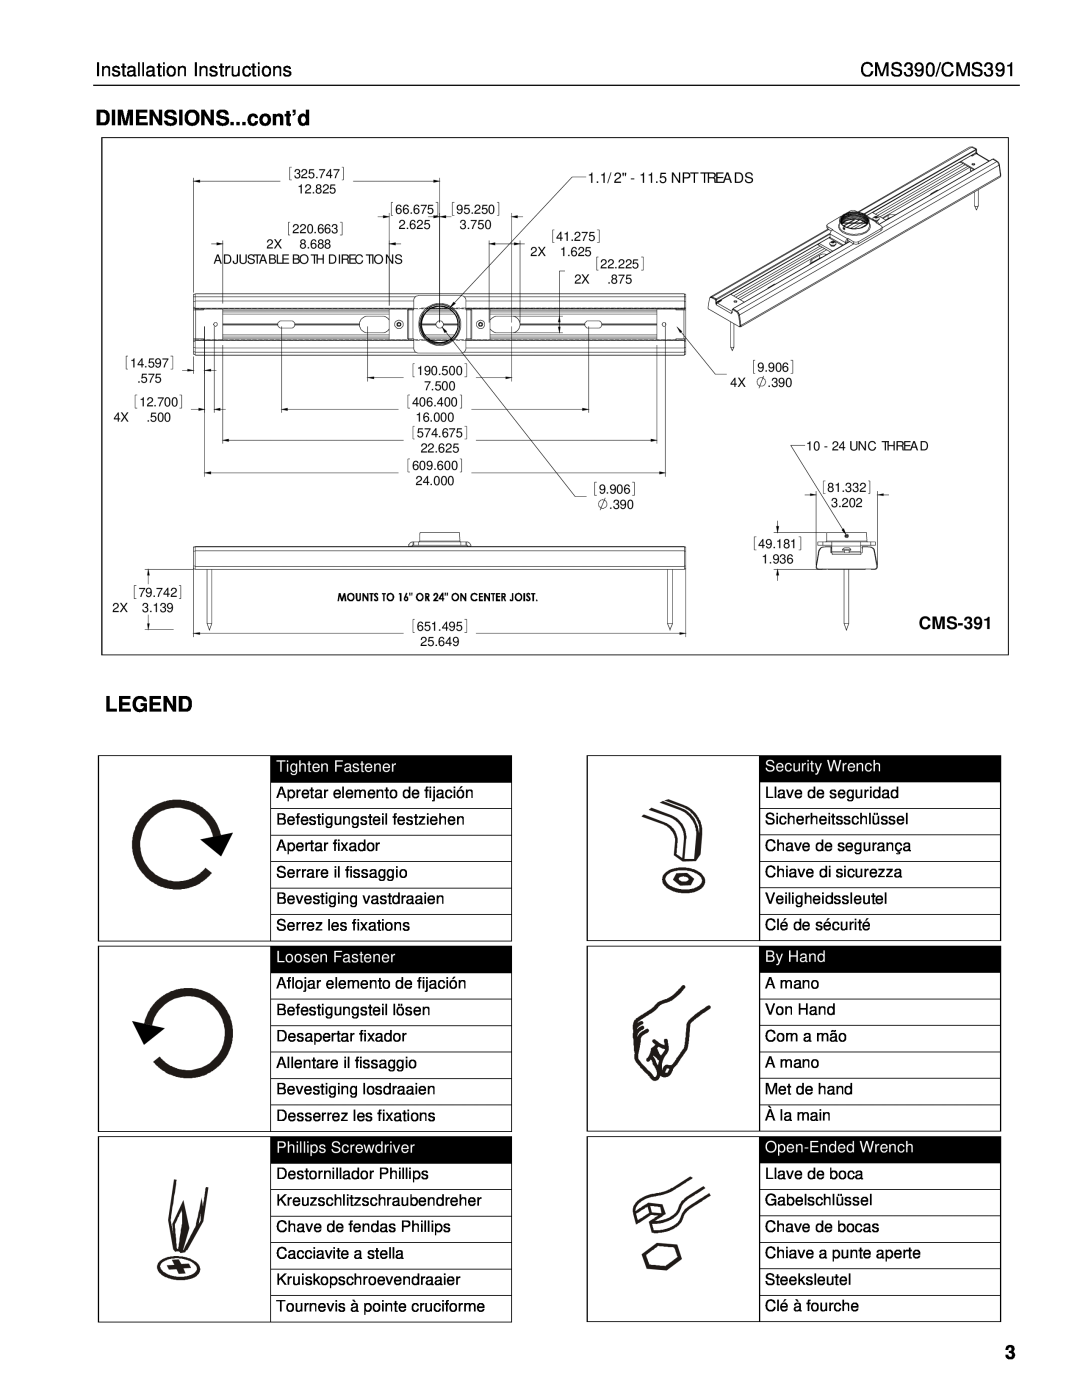 Chief Manufacturing DIMENSIONS...cont’d, CMS-391, Installation Instructions, CMS390/CMS391, Tighten Fastener, By Hand 